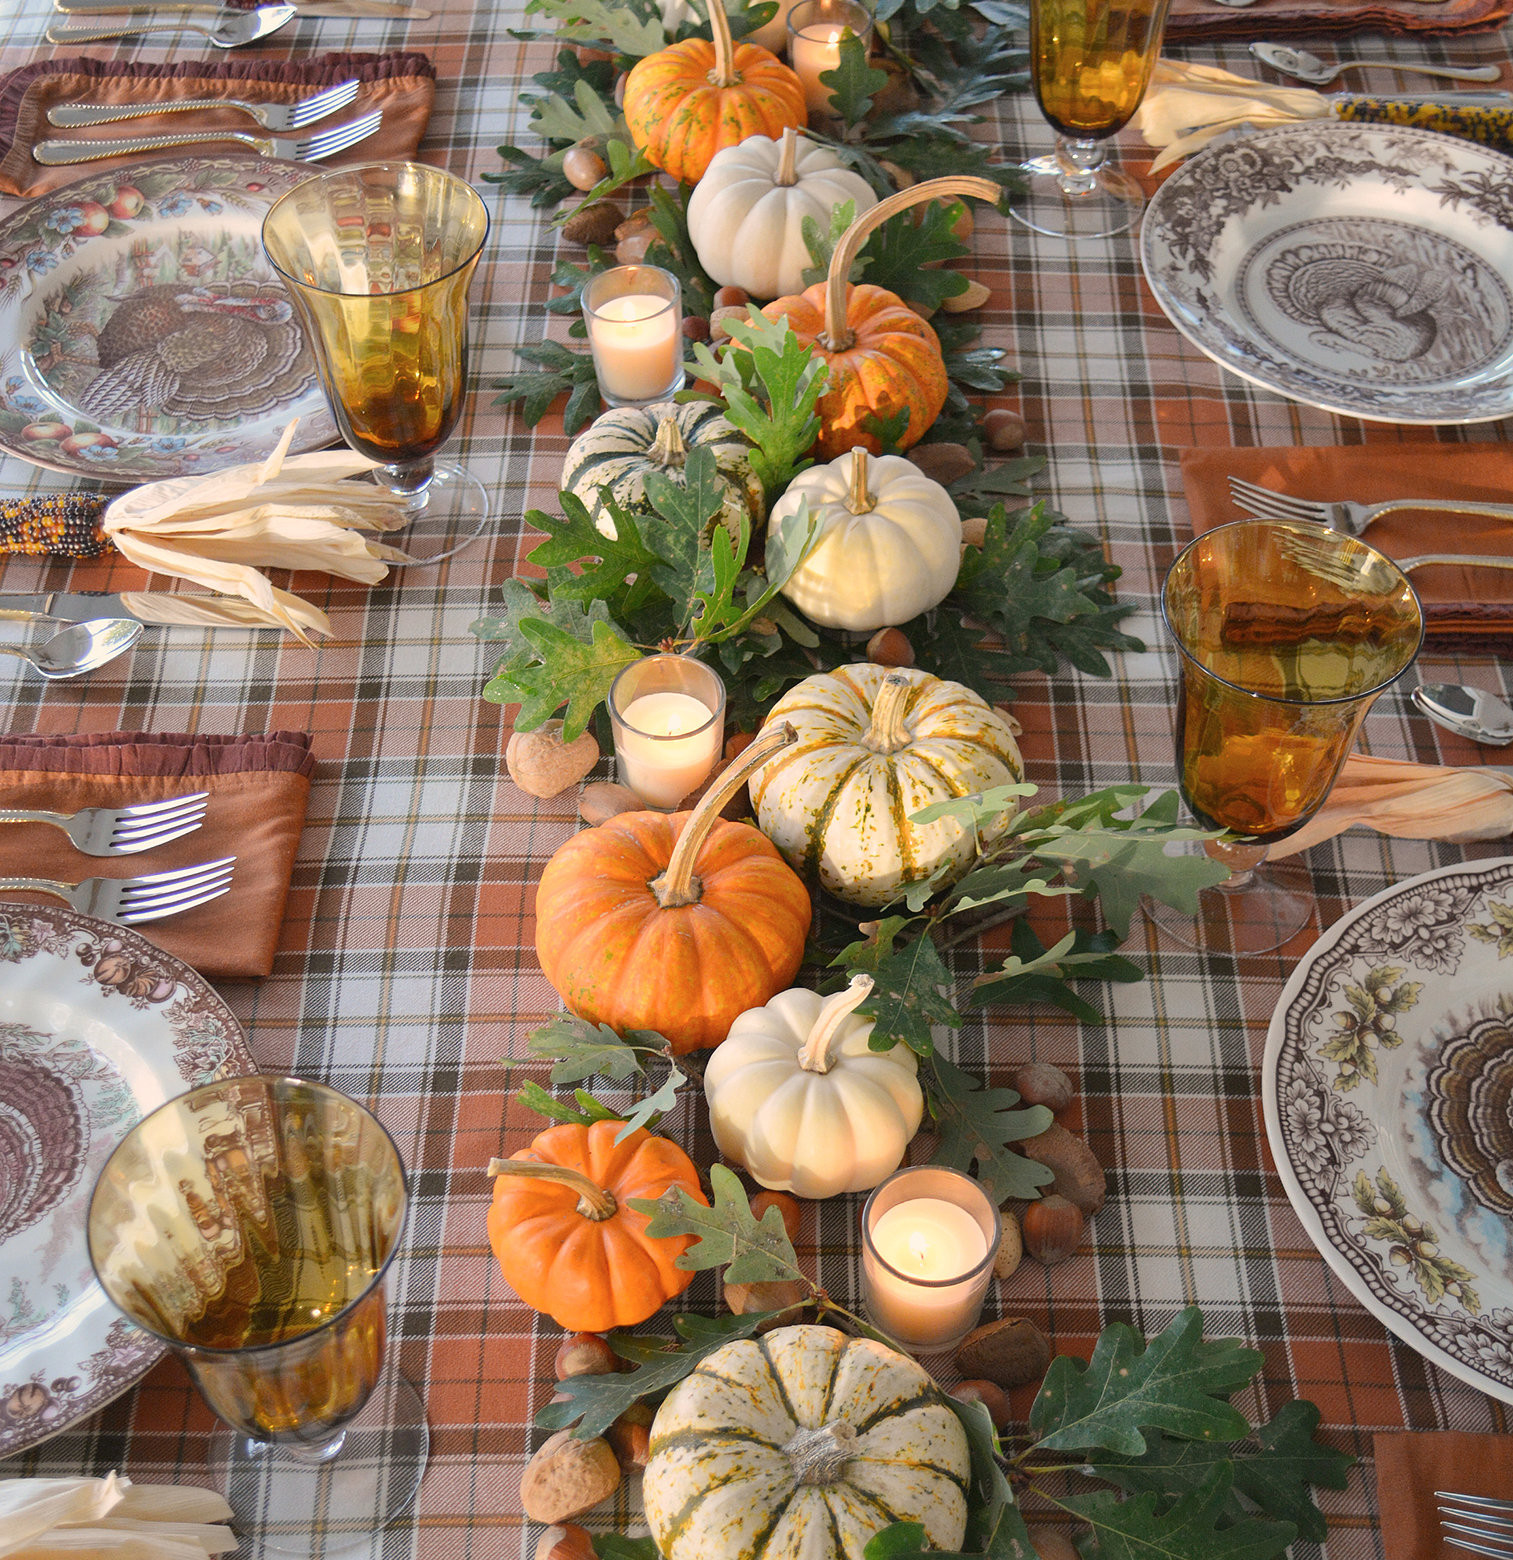 Simple Thanksgiving Table Decorations
 34 Stunning Thanksgiving Table Decor Ideas for 2019